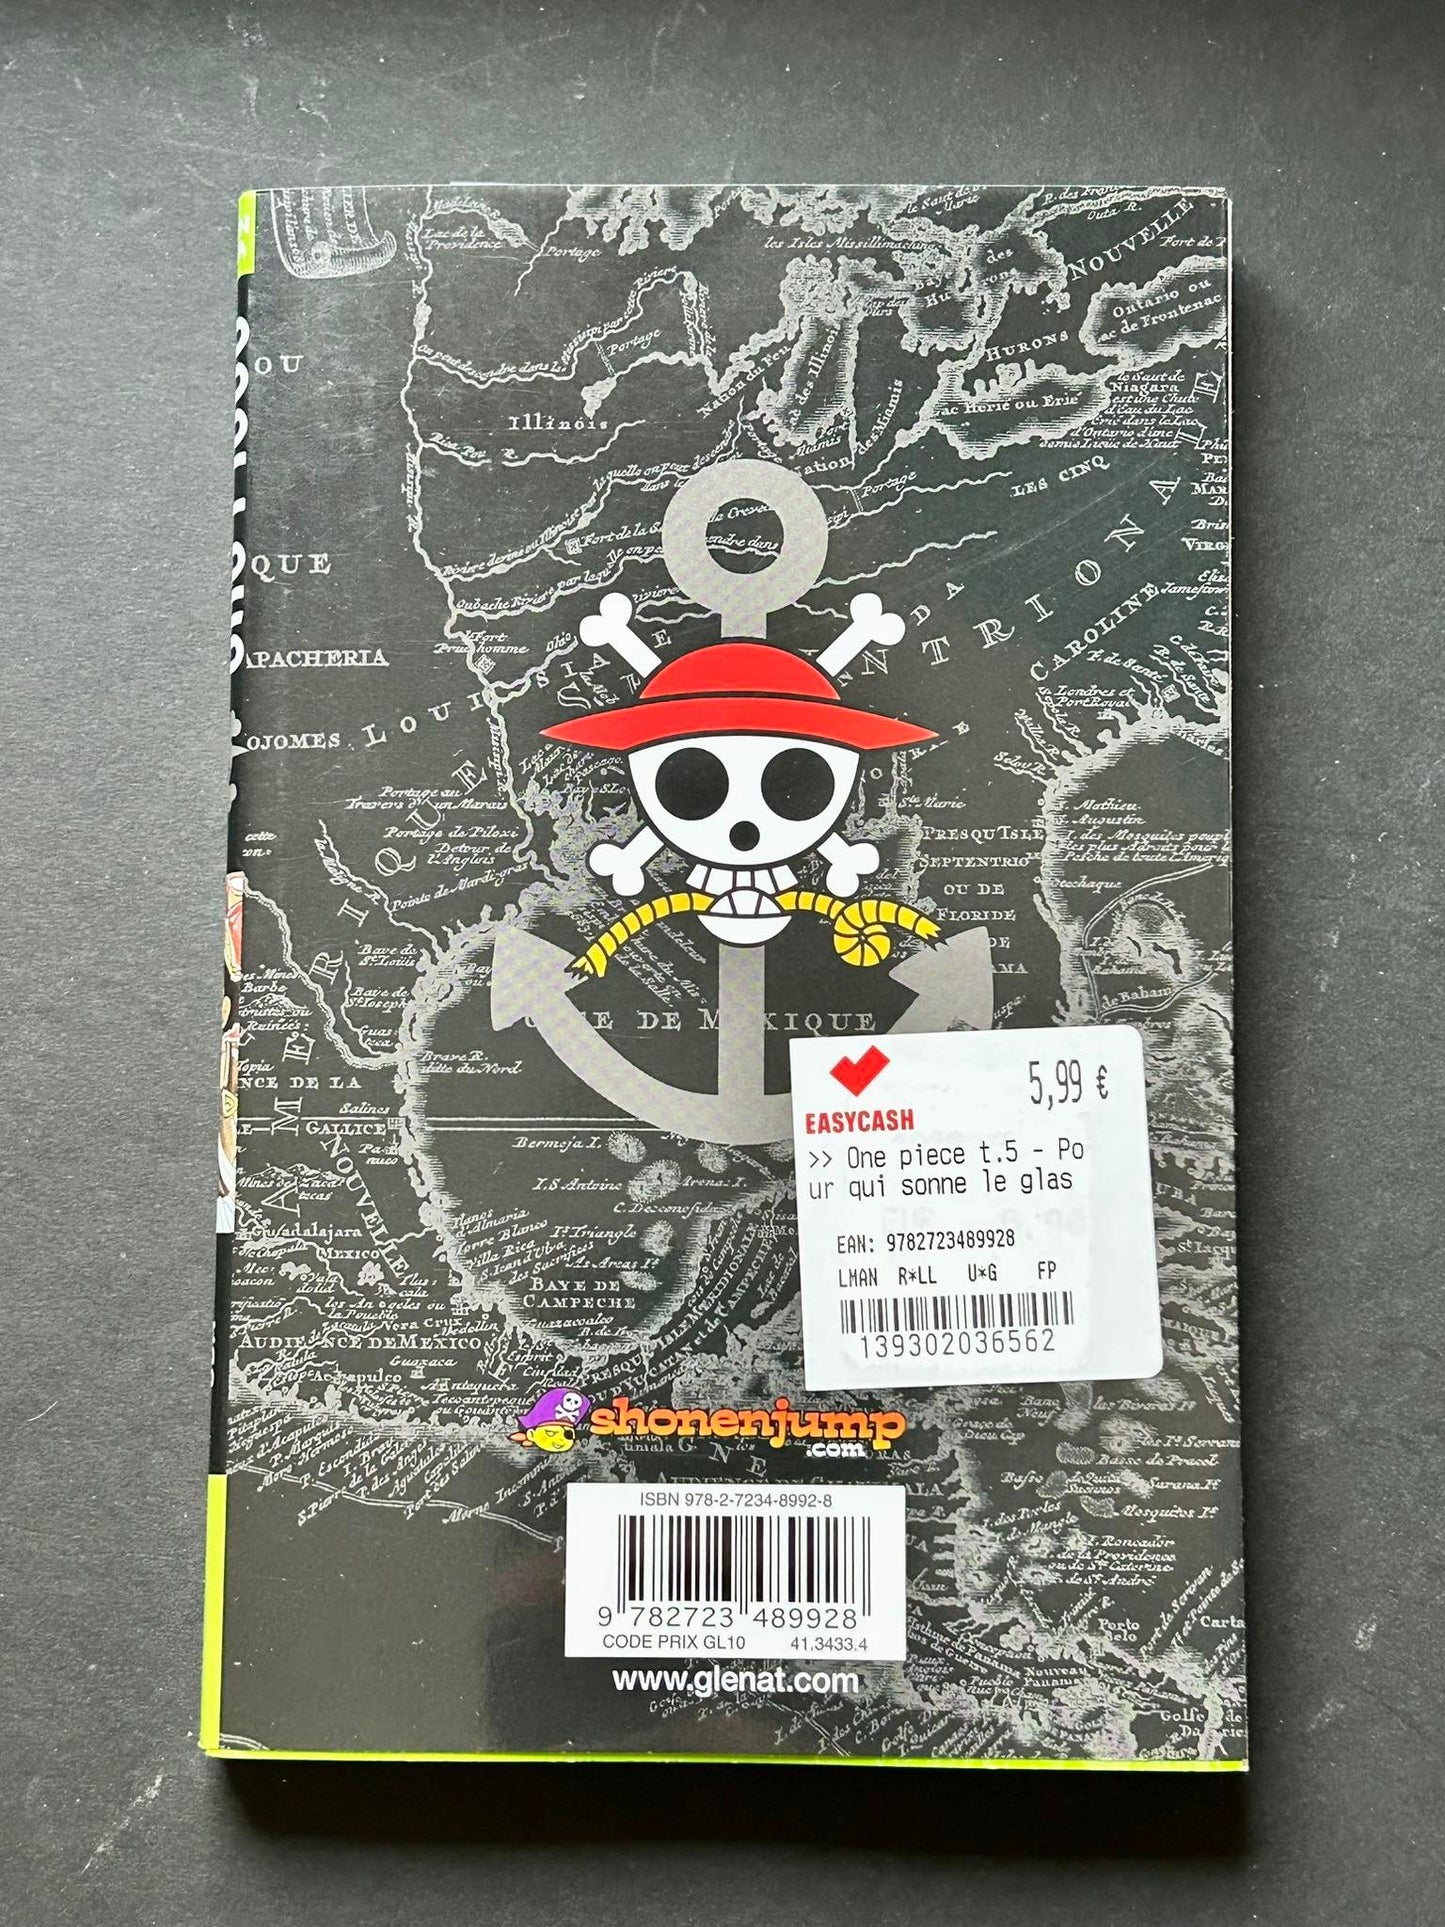 One Piece (nieuwe uitgave - gele uitgave) T5